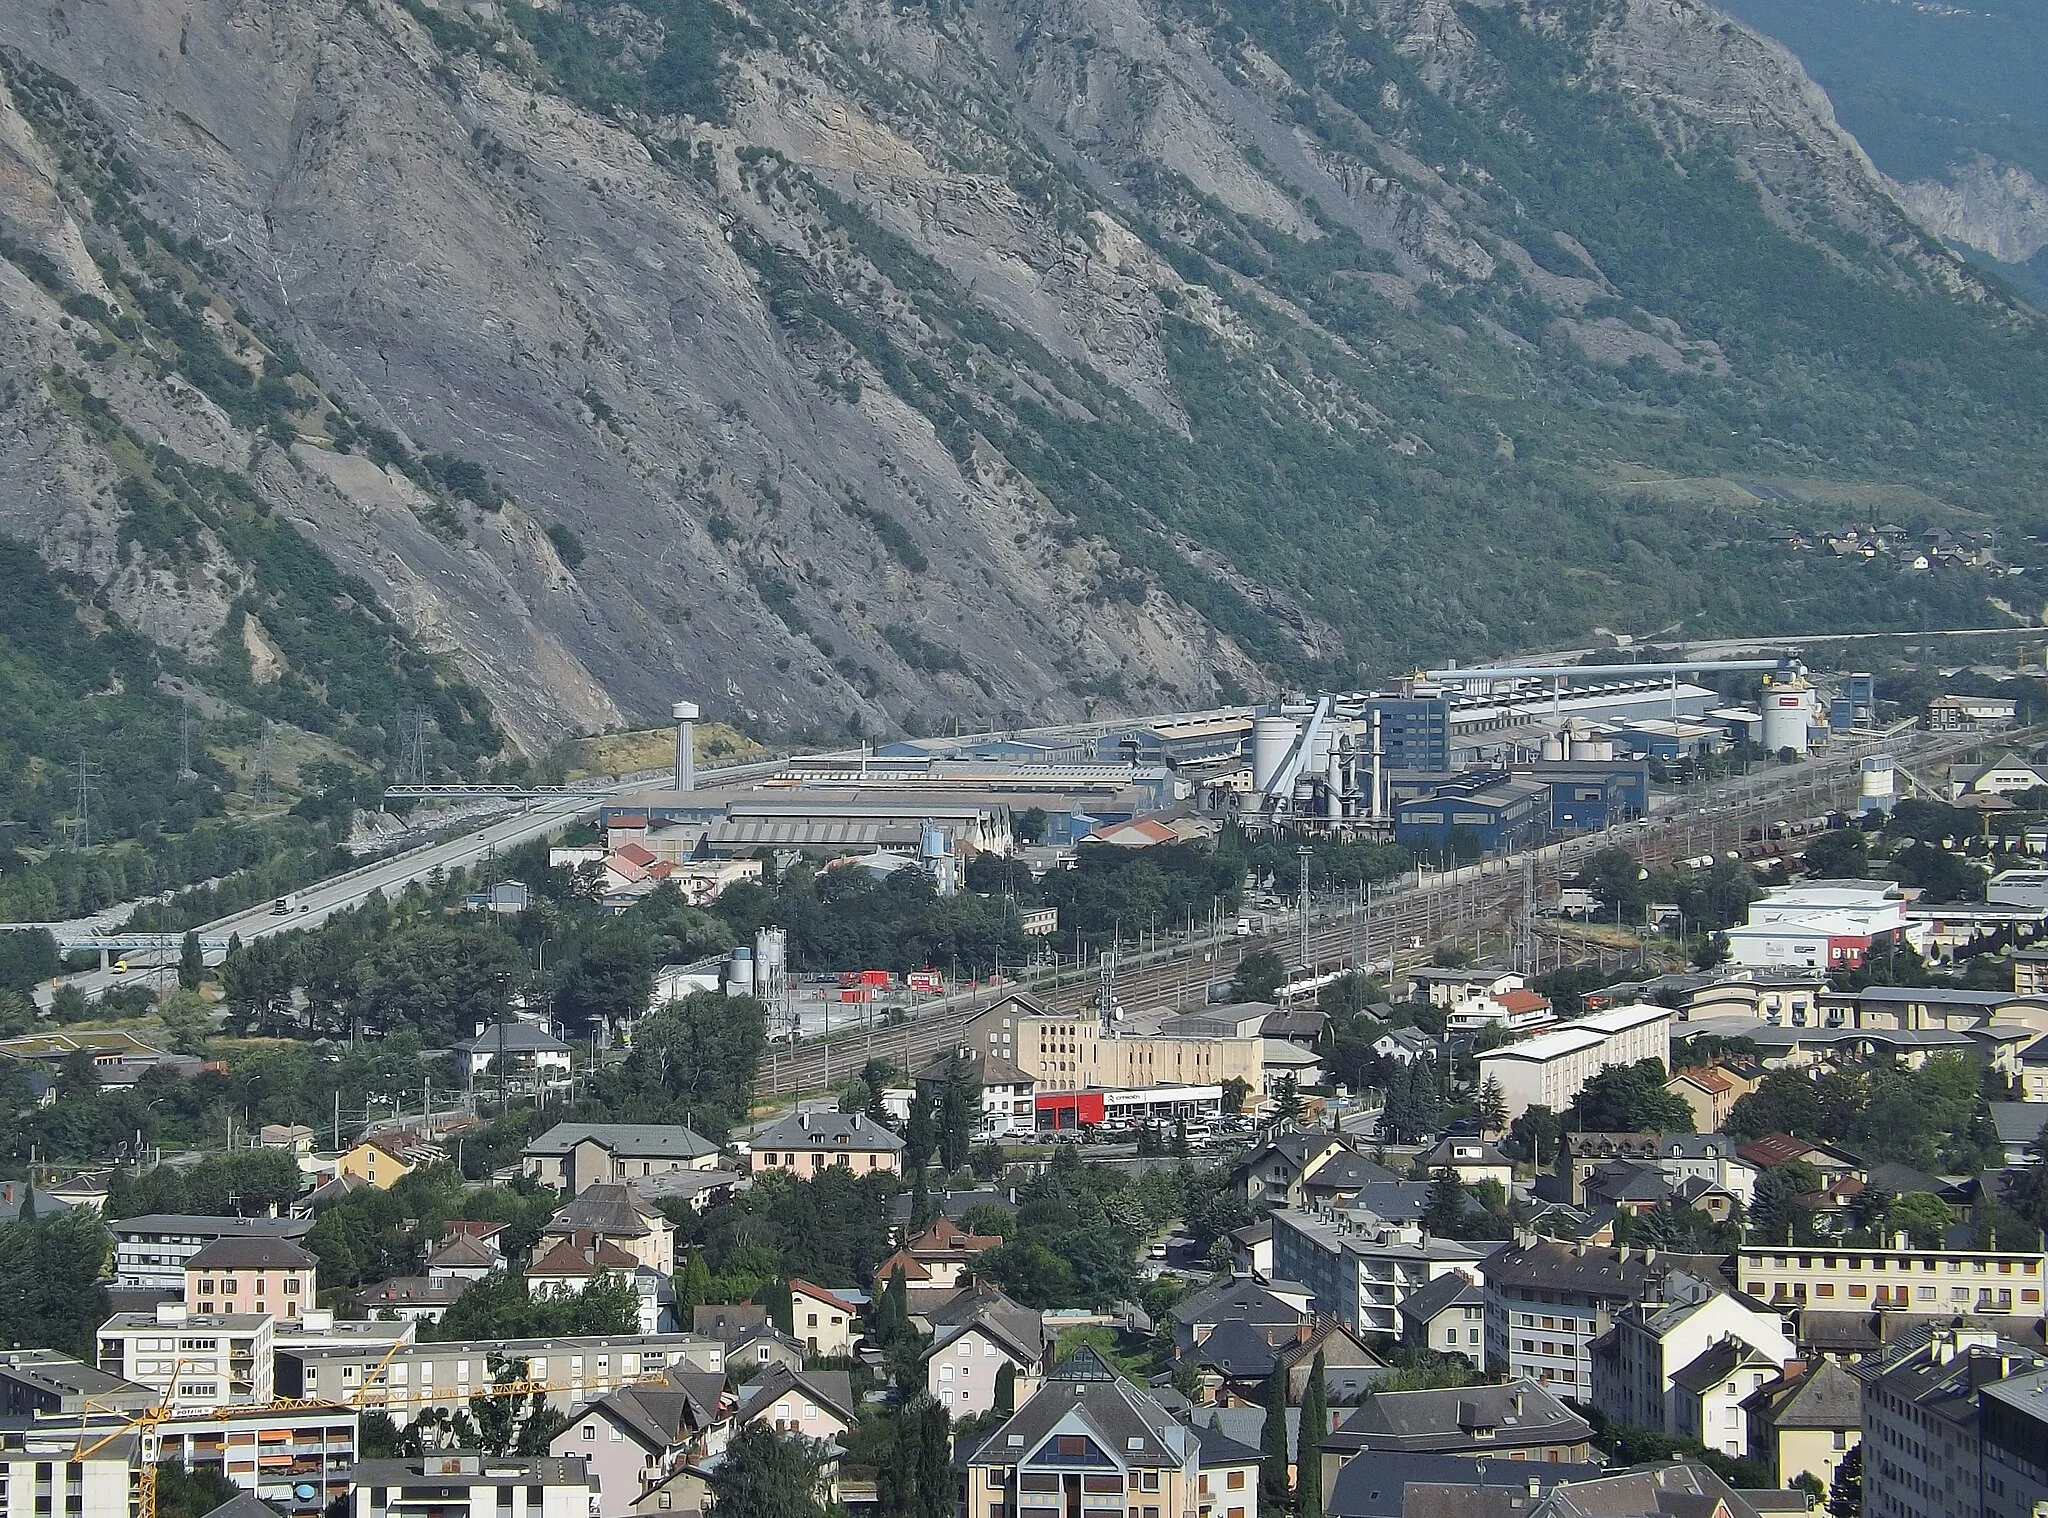 Photo showing: Sight of Rio Tinto Alcan (Canadian aluminium producer) industrial area, in Saint-Jean-de-Maurienne (Maurienne valley), Savoie, France.